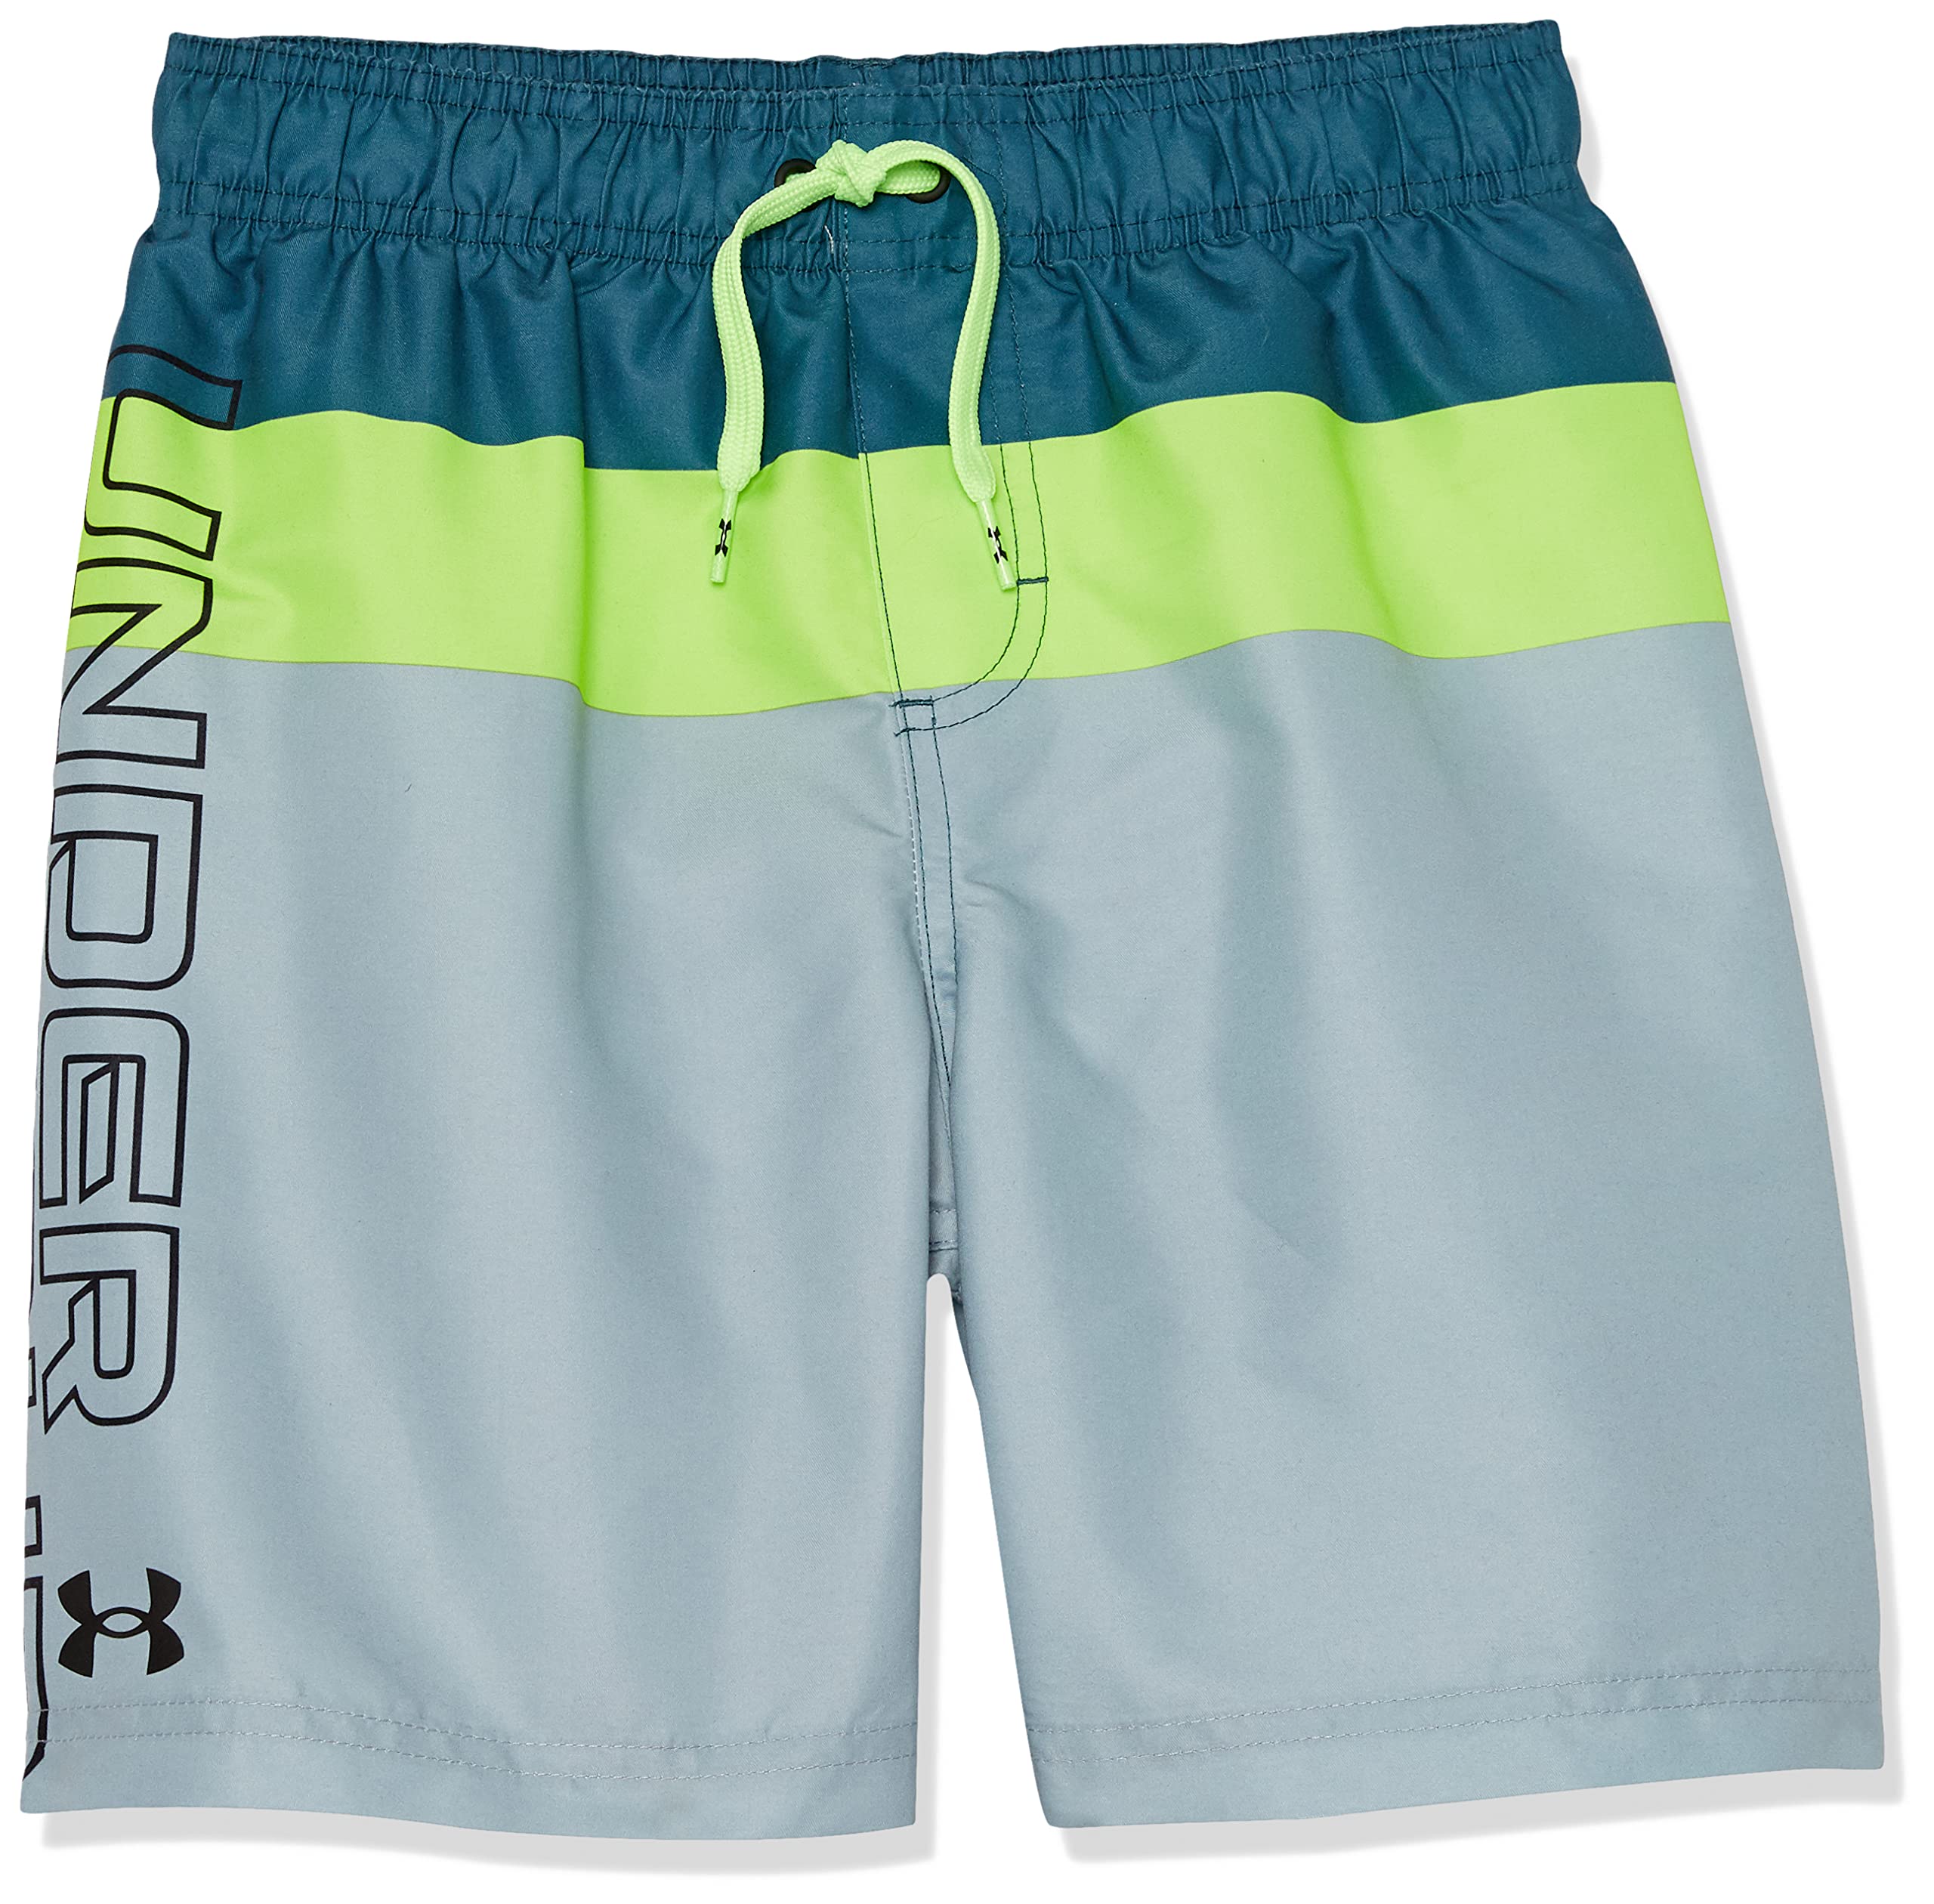 Under Armour Boys' Swim Trunk Shorts, Lightweight & Water Repelling, Quick Dry Material, Static Blue Triblock, X-Large